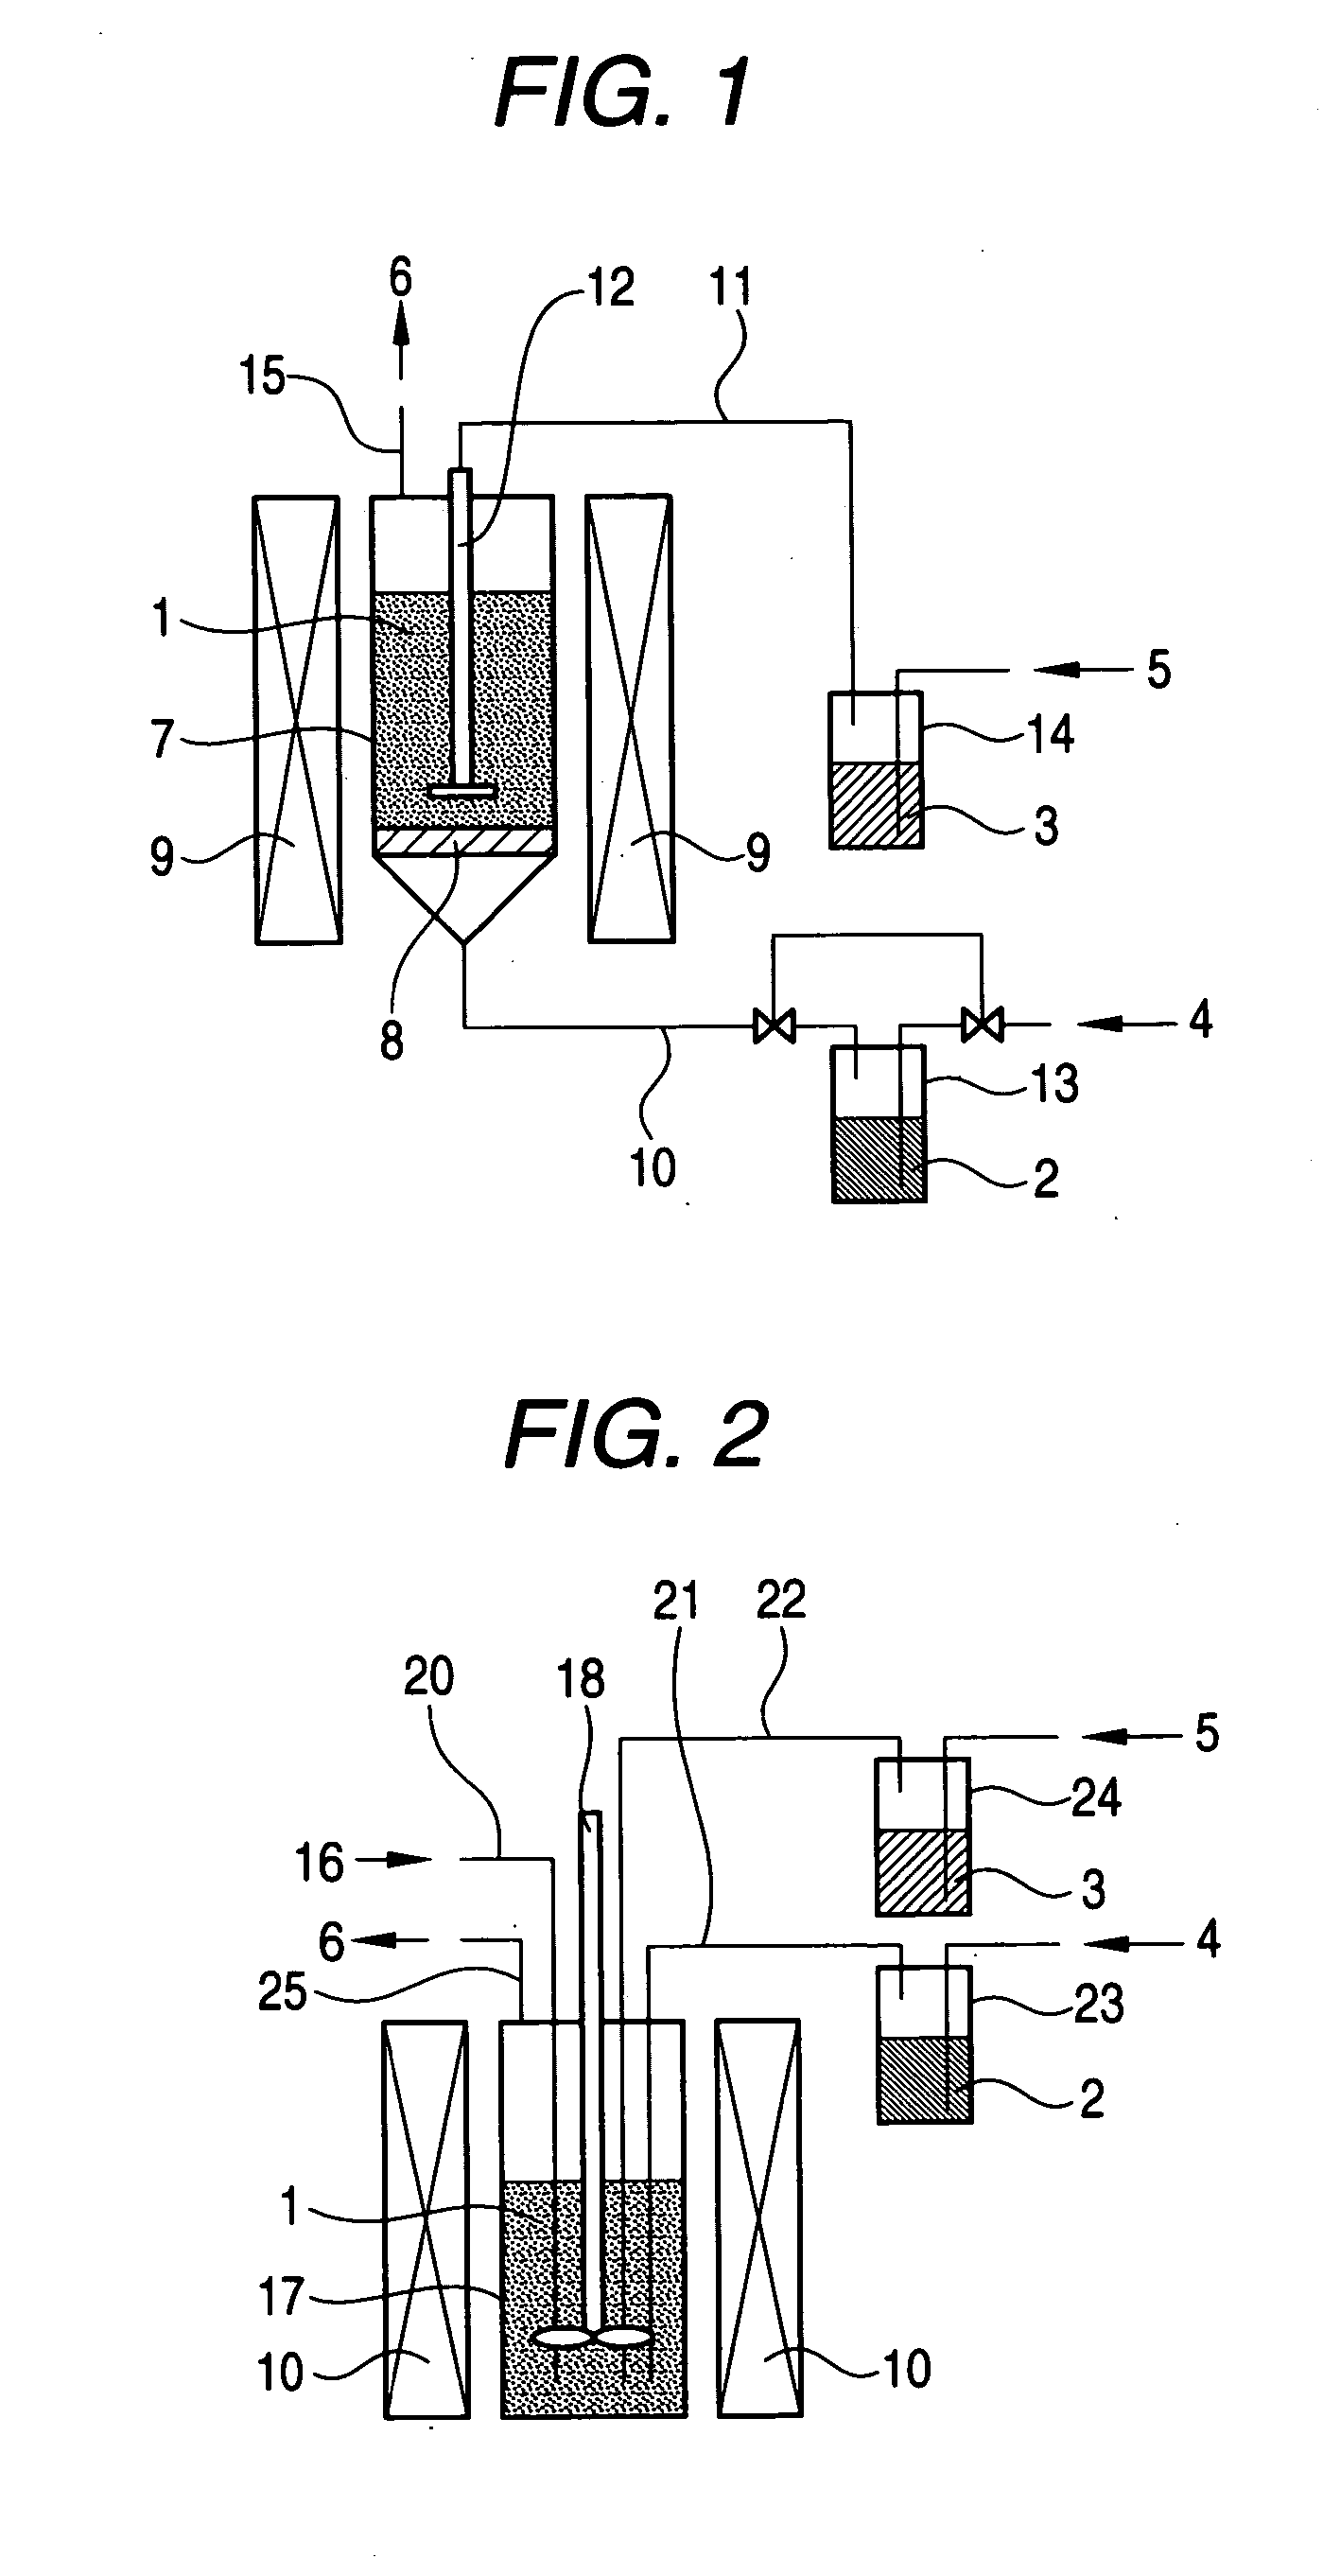 Electroluminescent phosphor, process for producing the same, and electroluminescent device containing the same